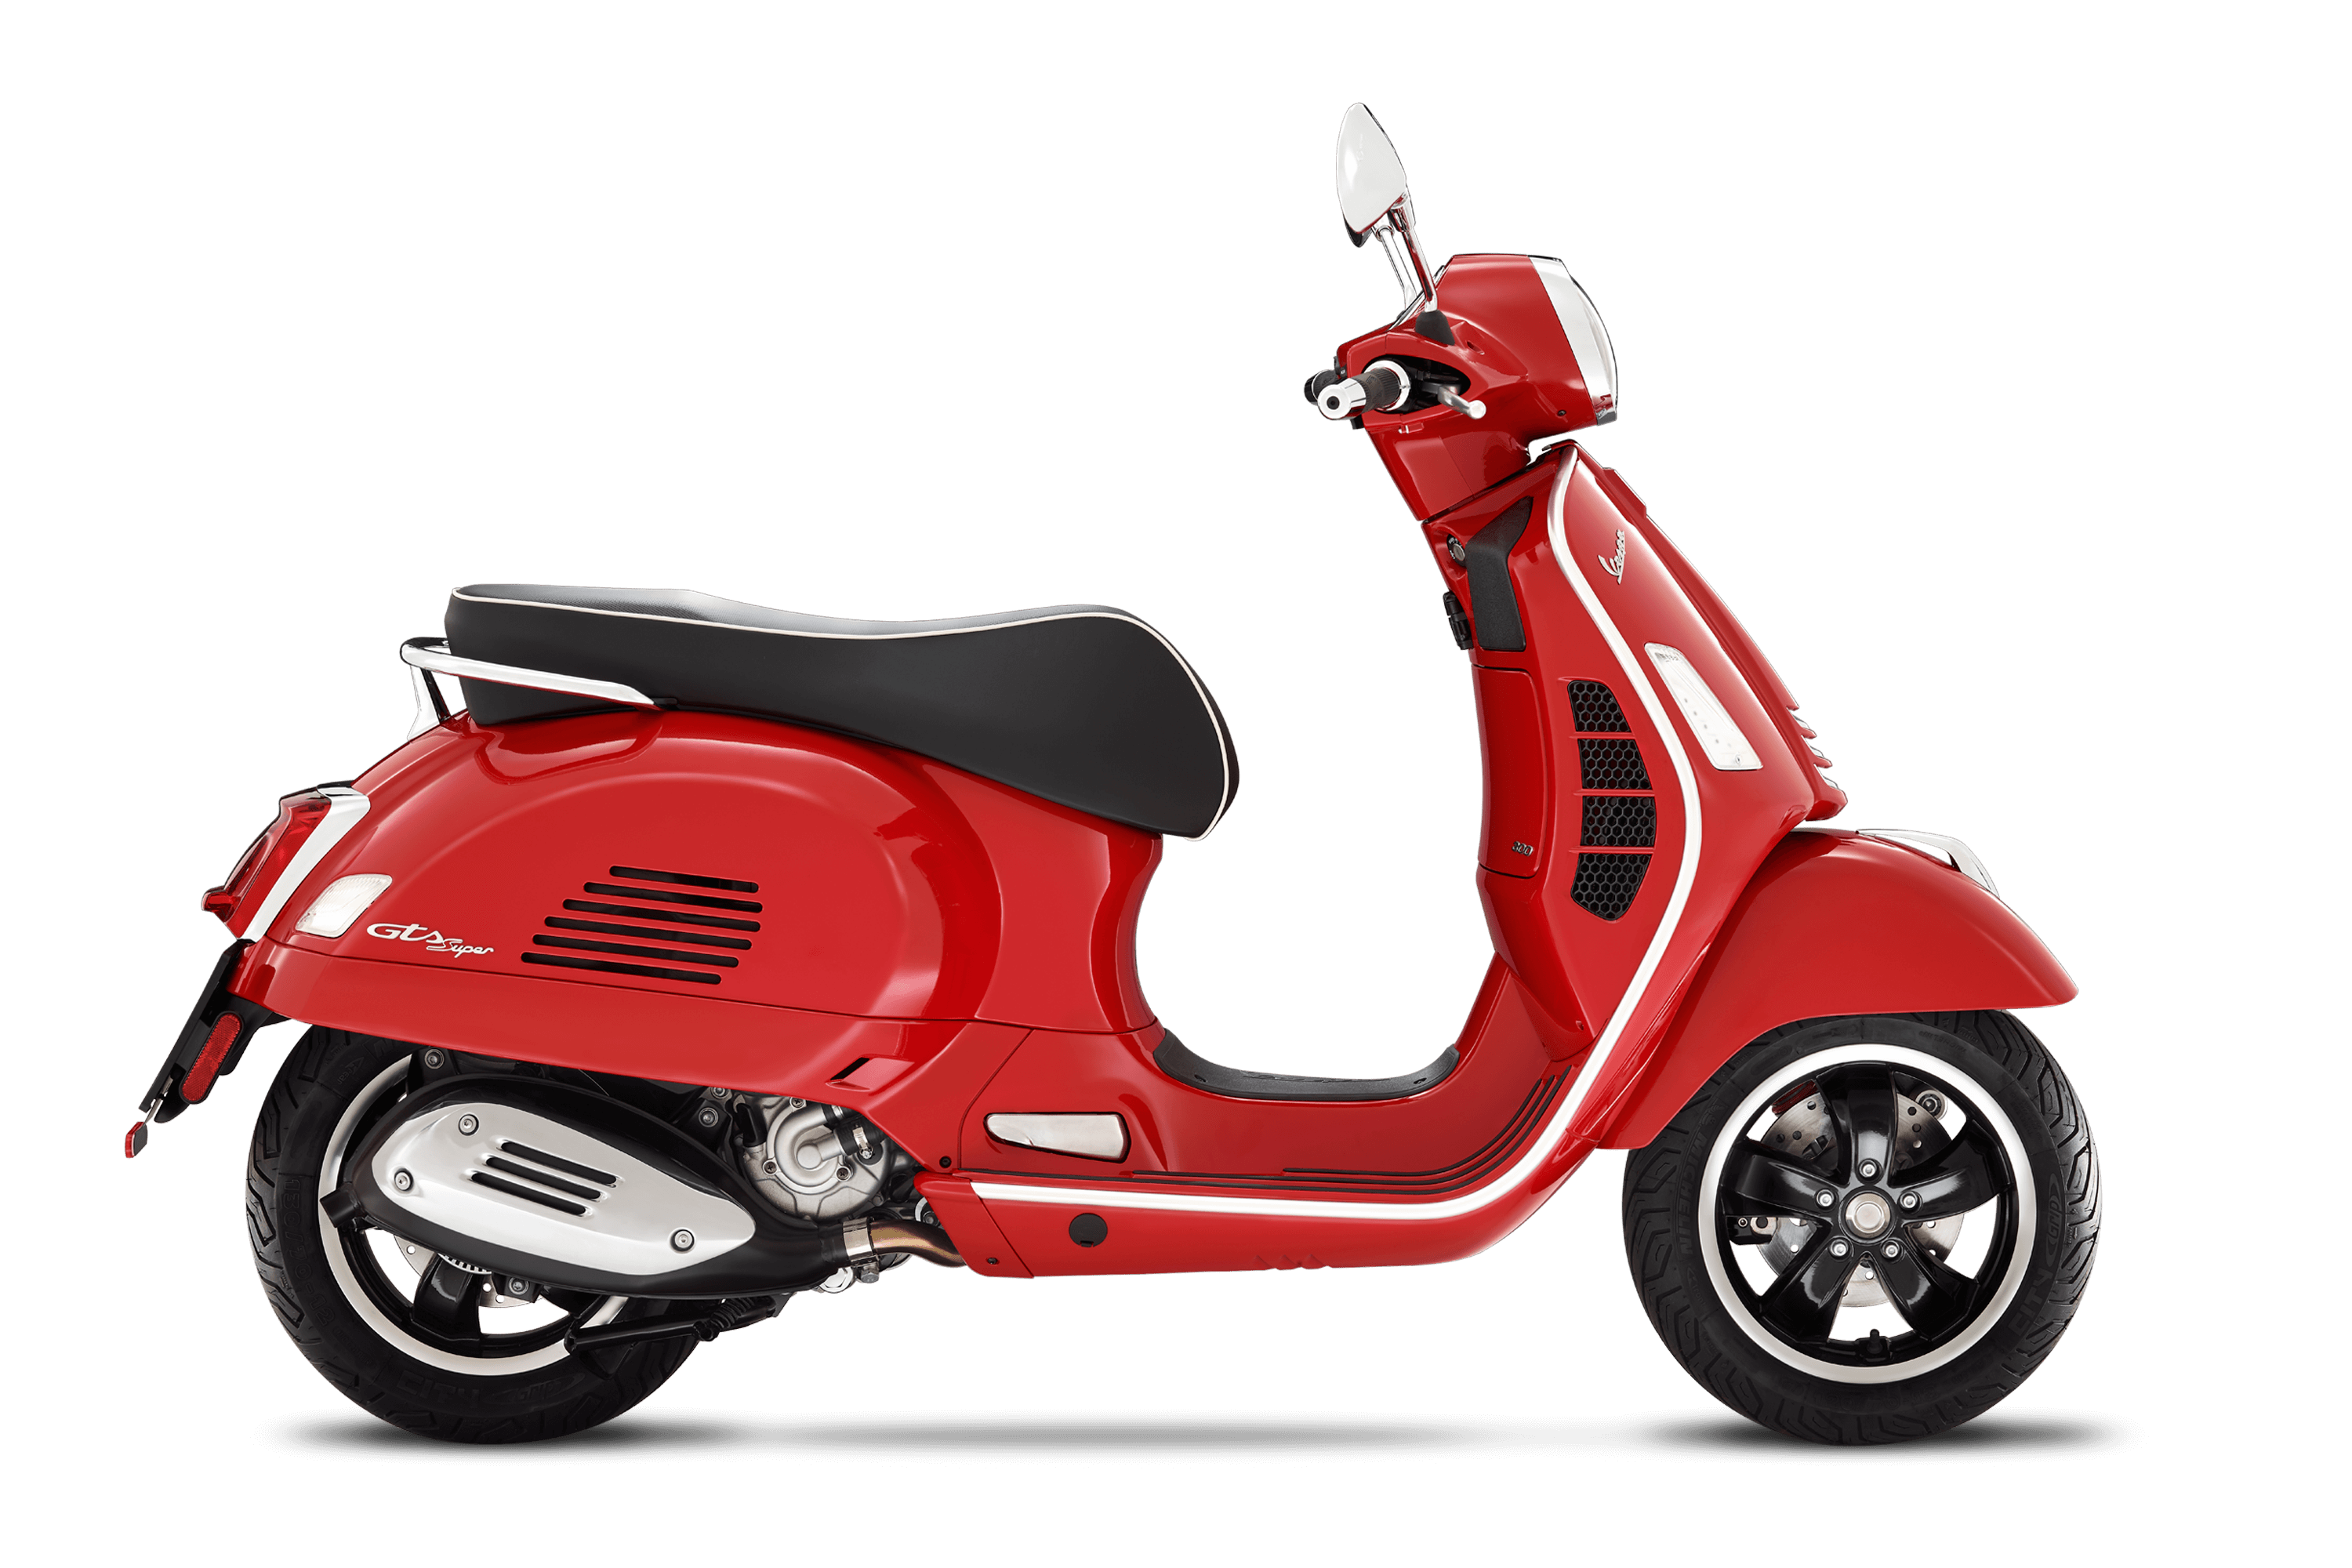 Vespa GTS Super 300: specs, features and price